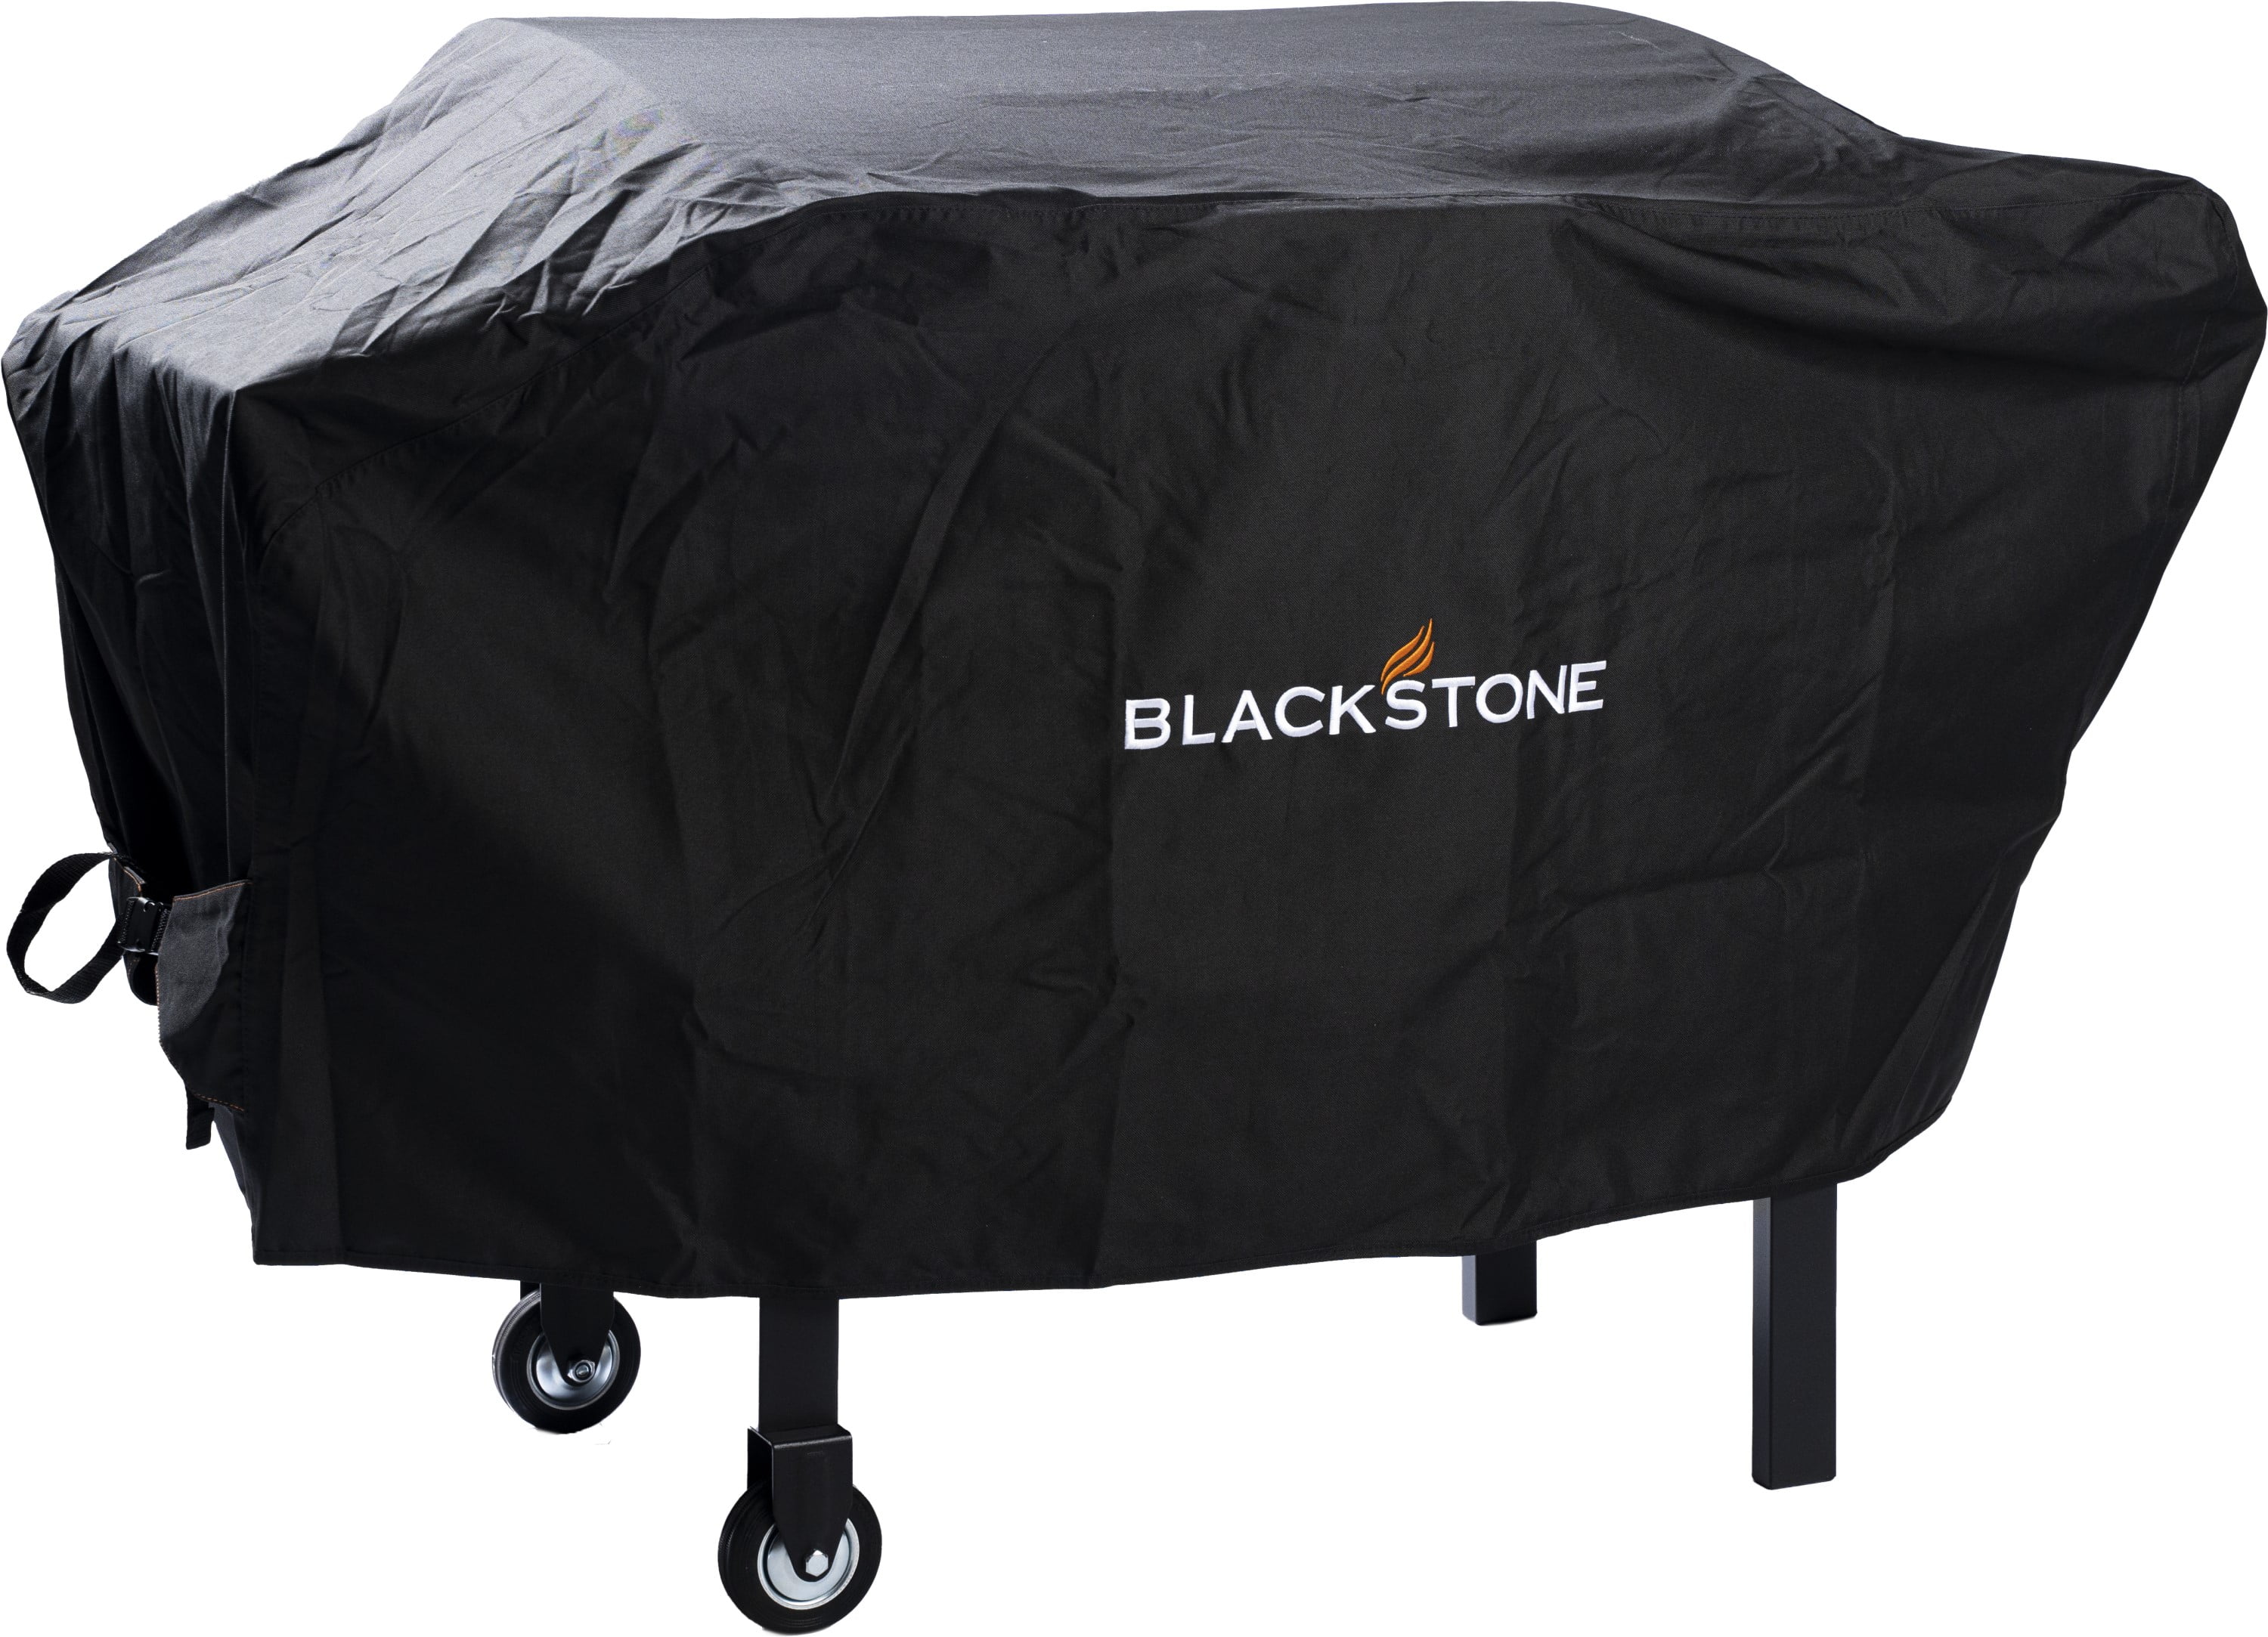 Iptienda BBQ Grill Cover Expert Grill Covers Heavy Duty Waterproof 55 inch Weather-Resistant Gas Grill Cover for Outdoor Barbecue Charcoal Grill